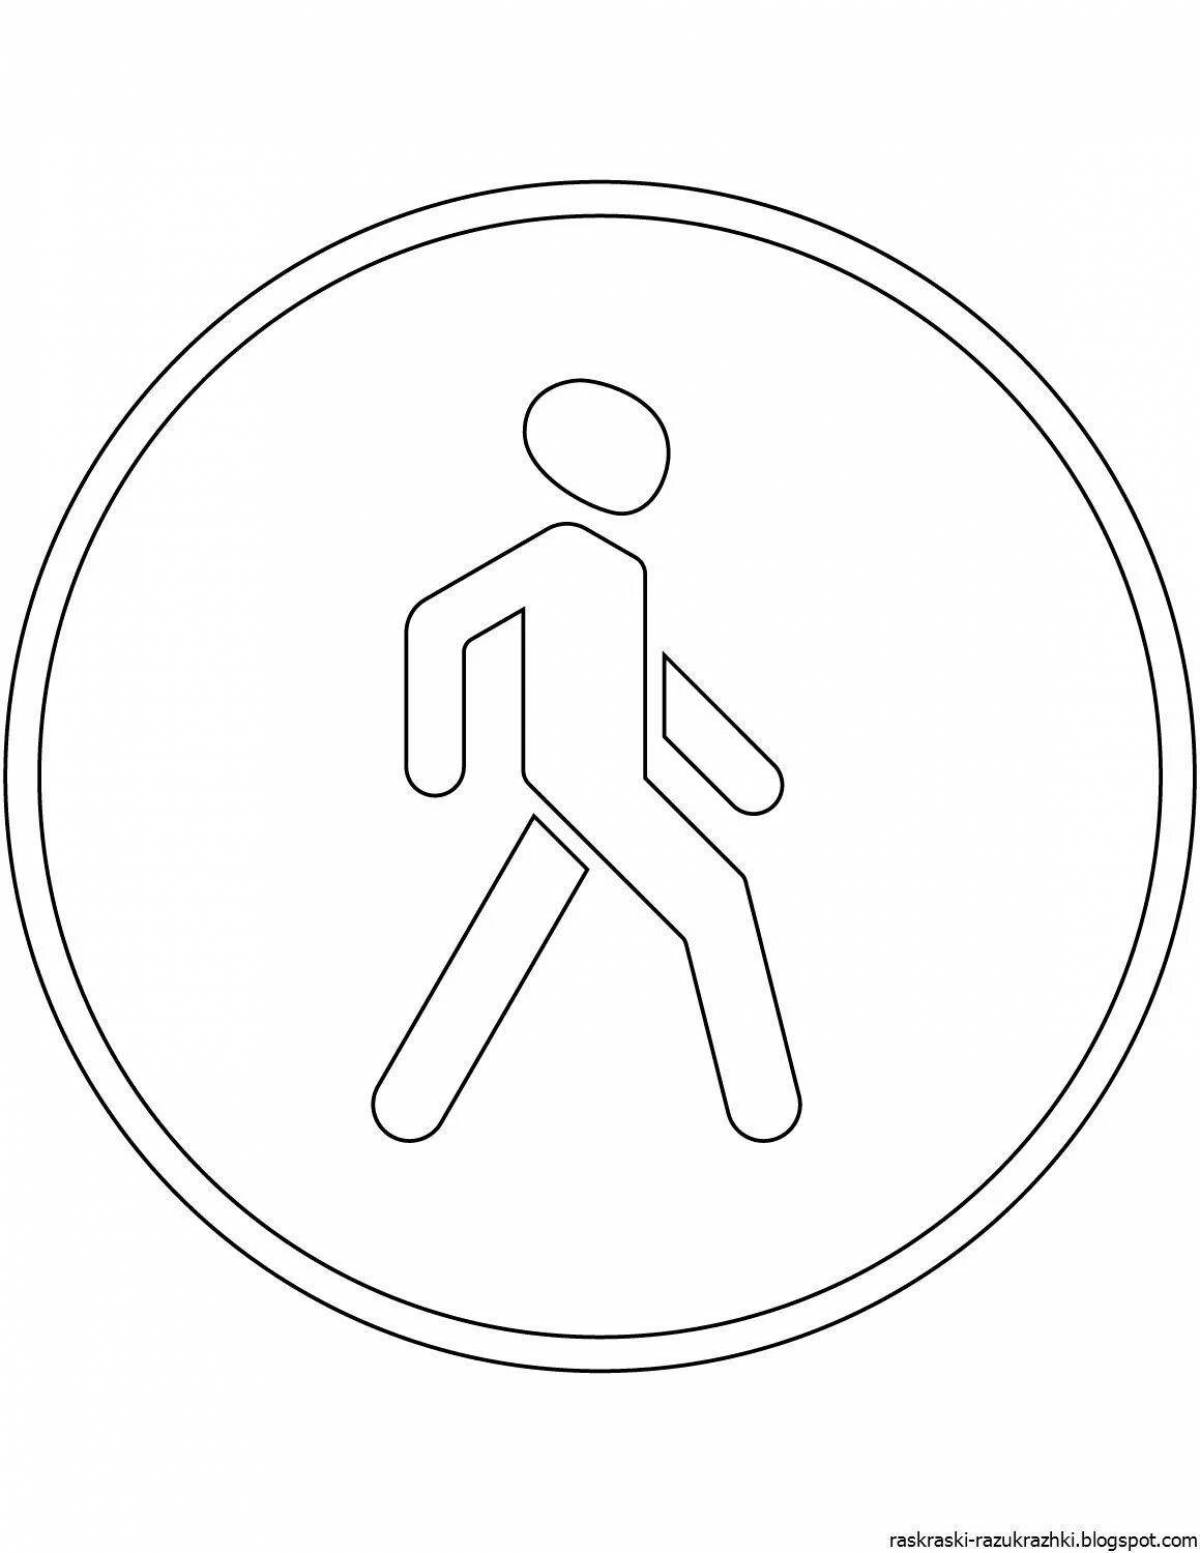 Coloring dynamic pedestrian signs